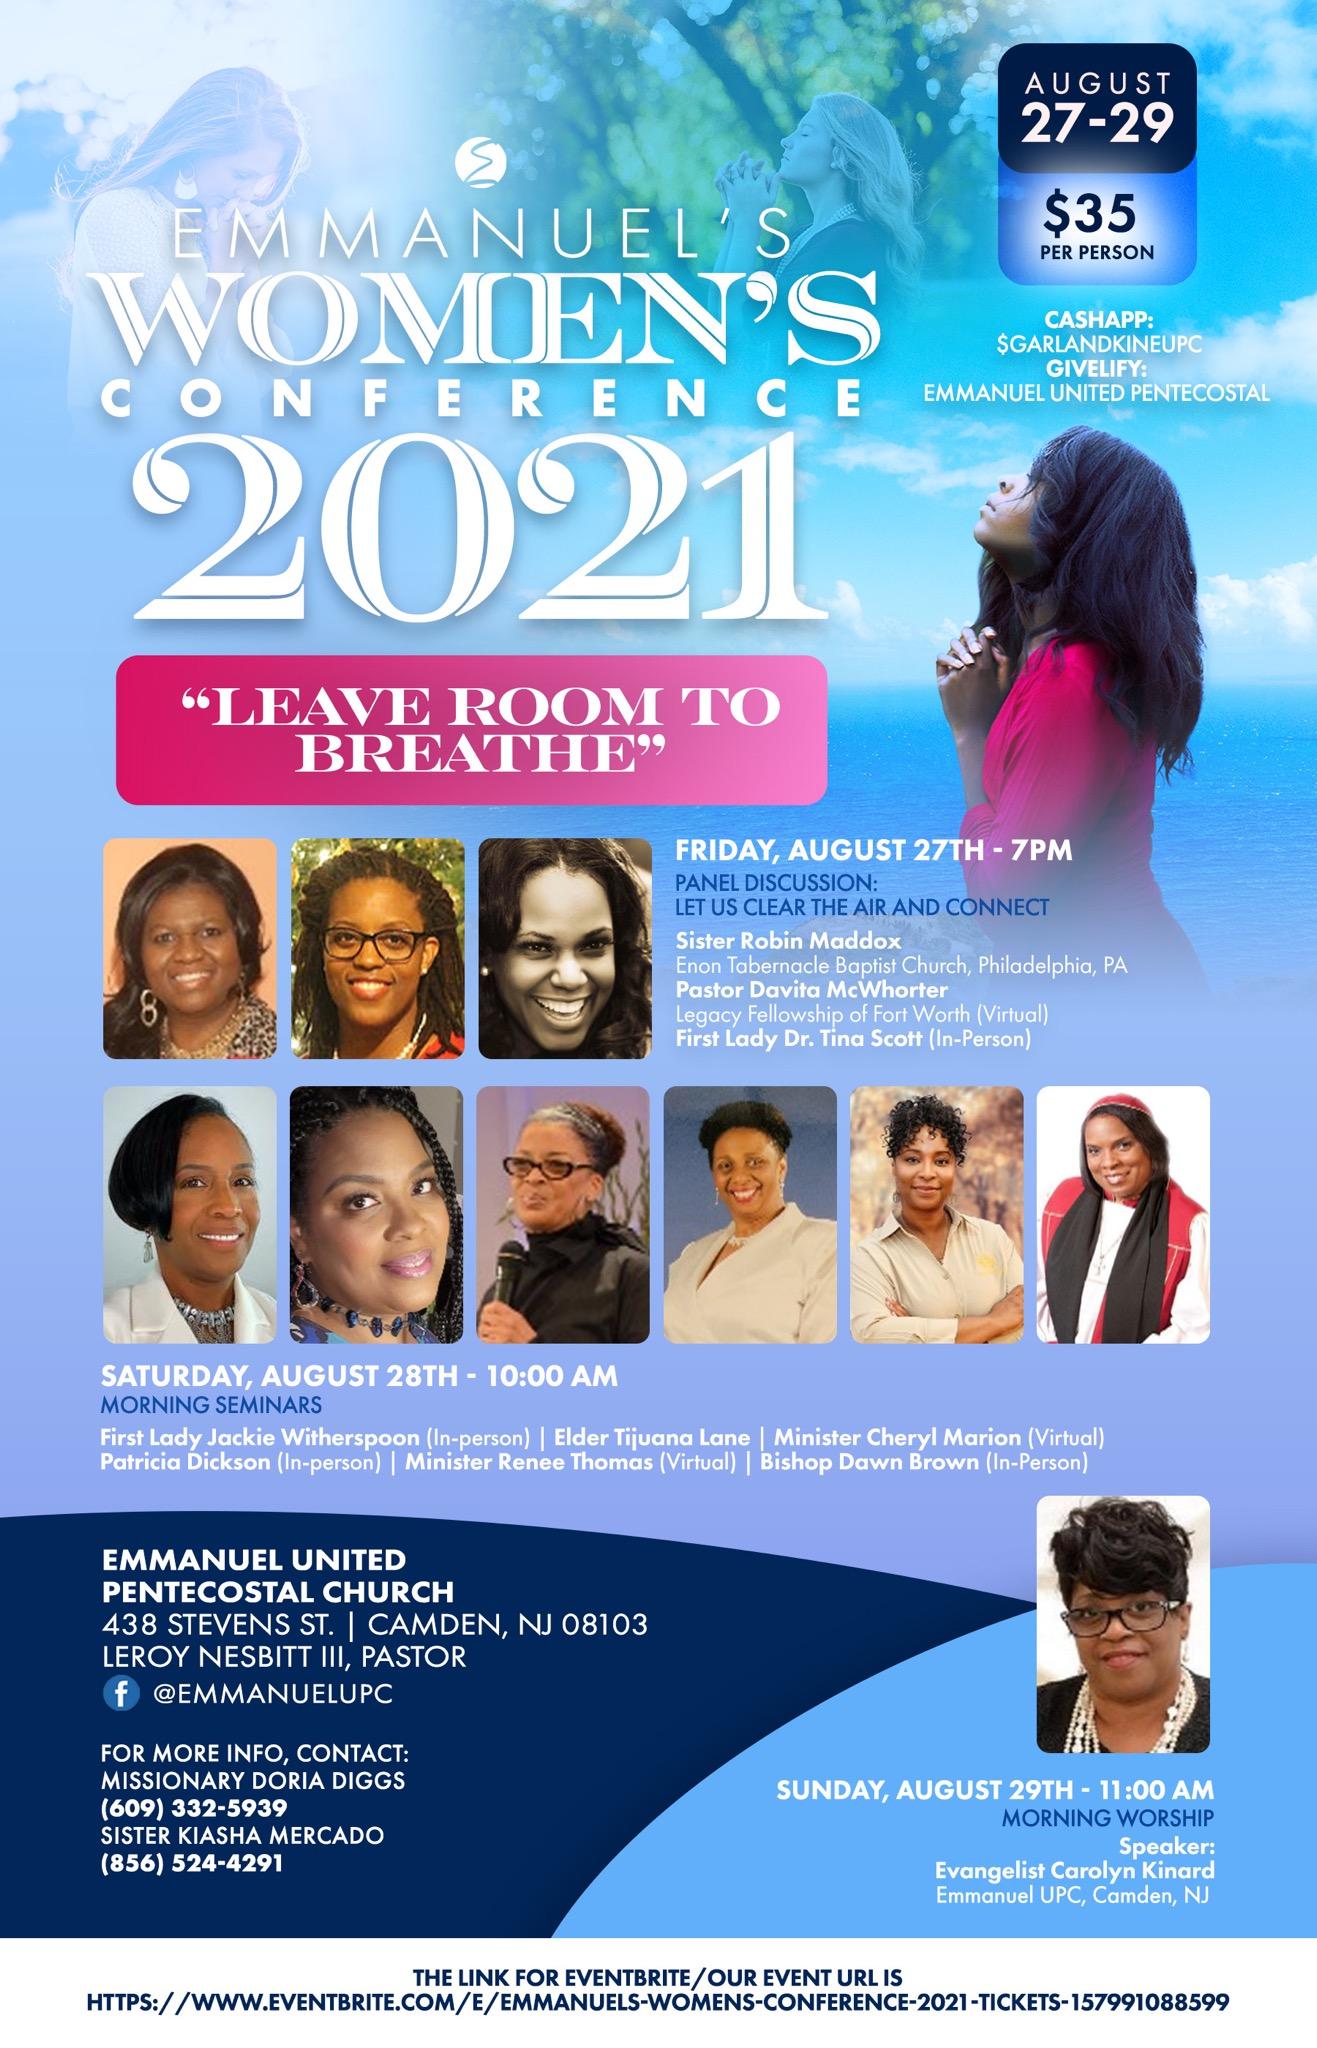 Emmanuel’s Women’s Conference 2021 “Leave Room To Breathe” August 27th – August 29th